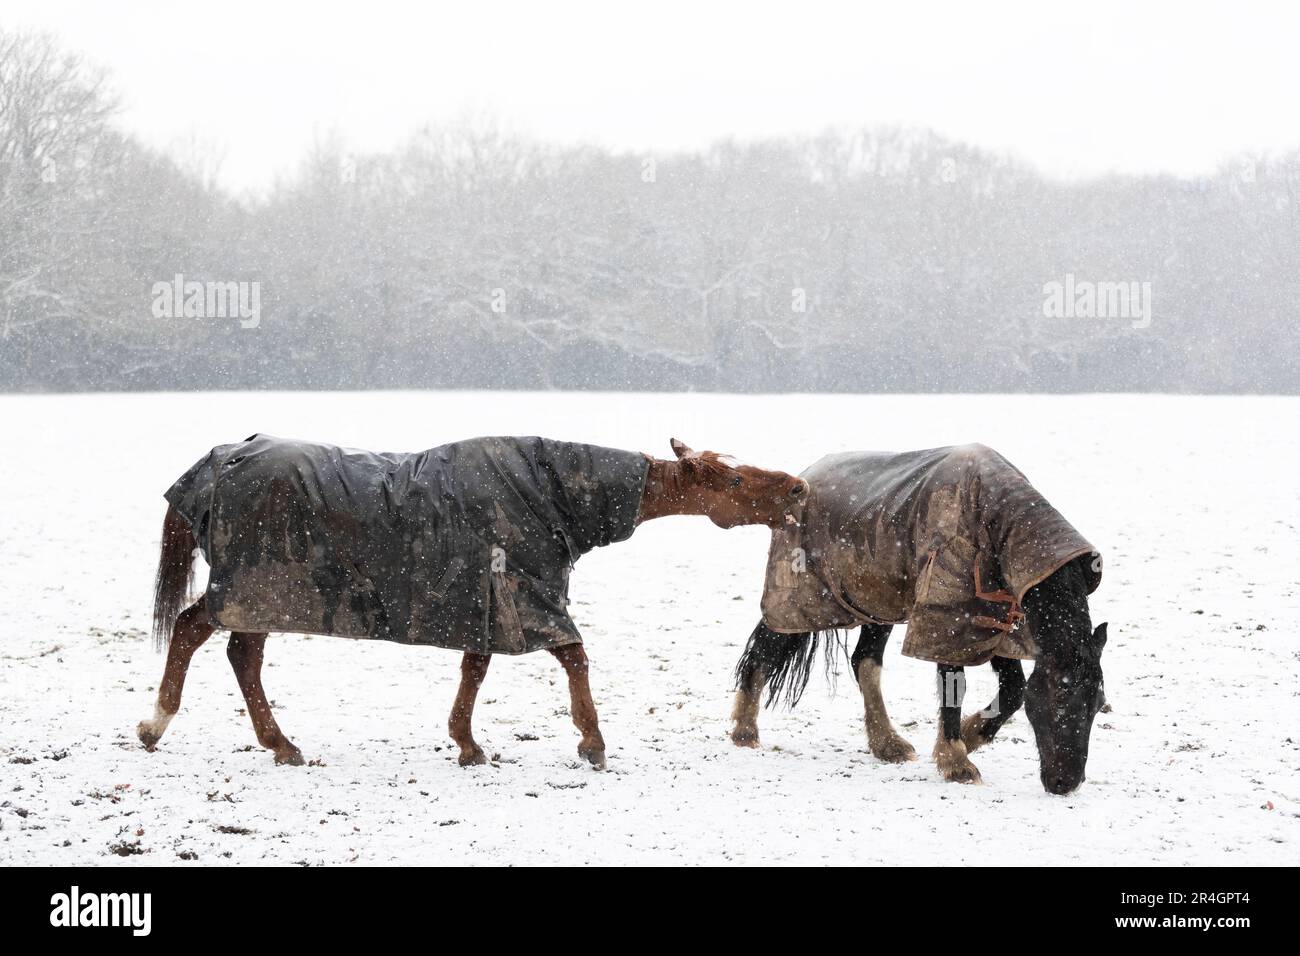 Two horses play-fighting in the falling snow in winter, UK. Stock Photo